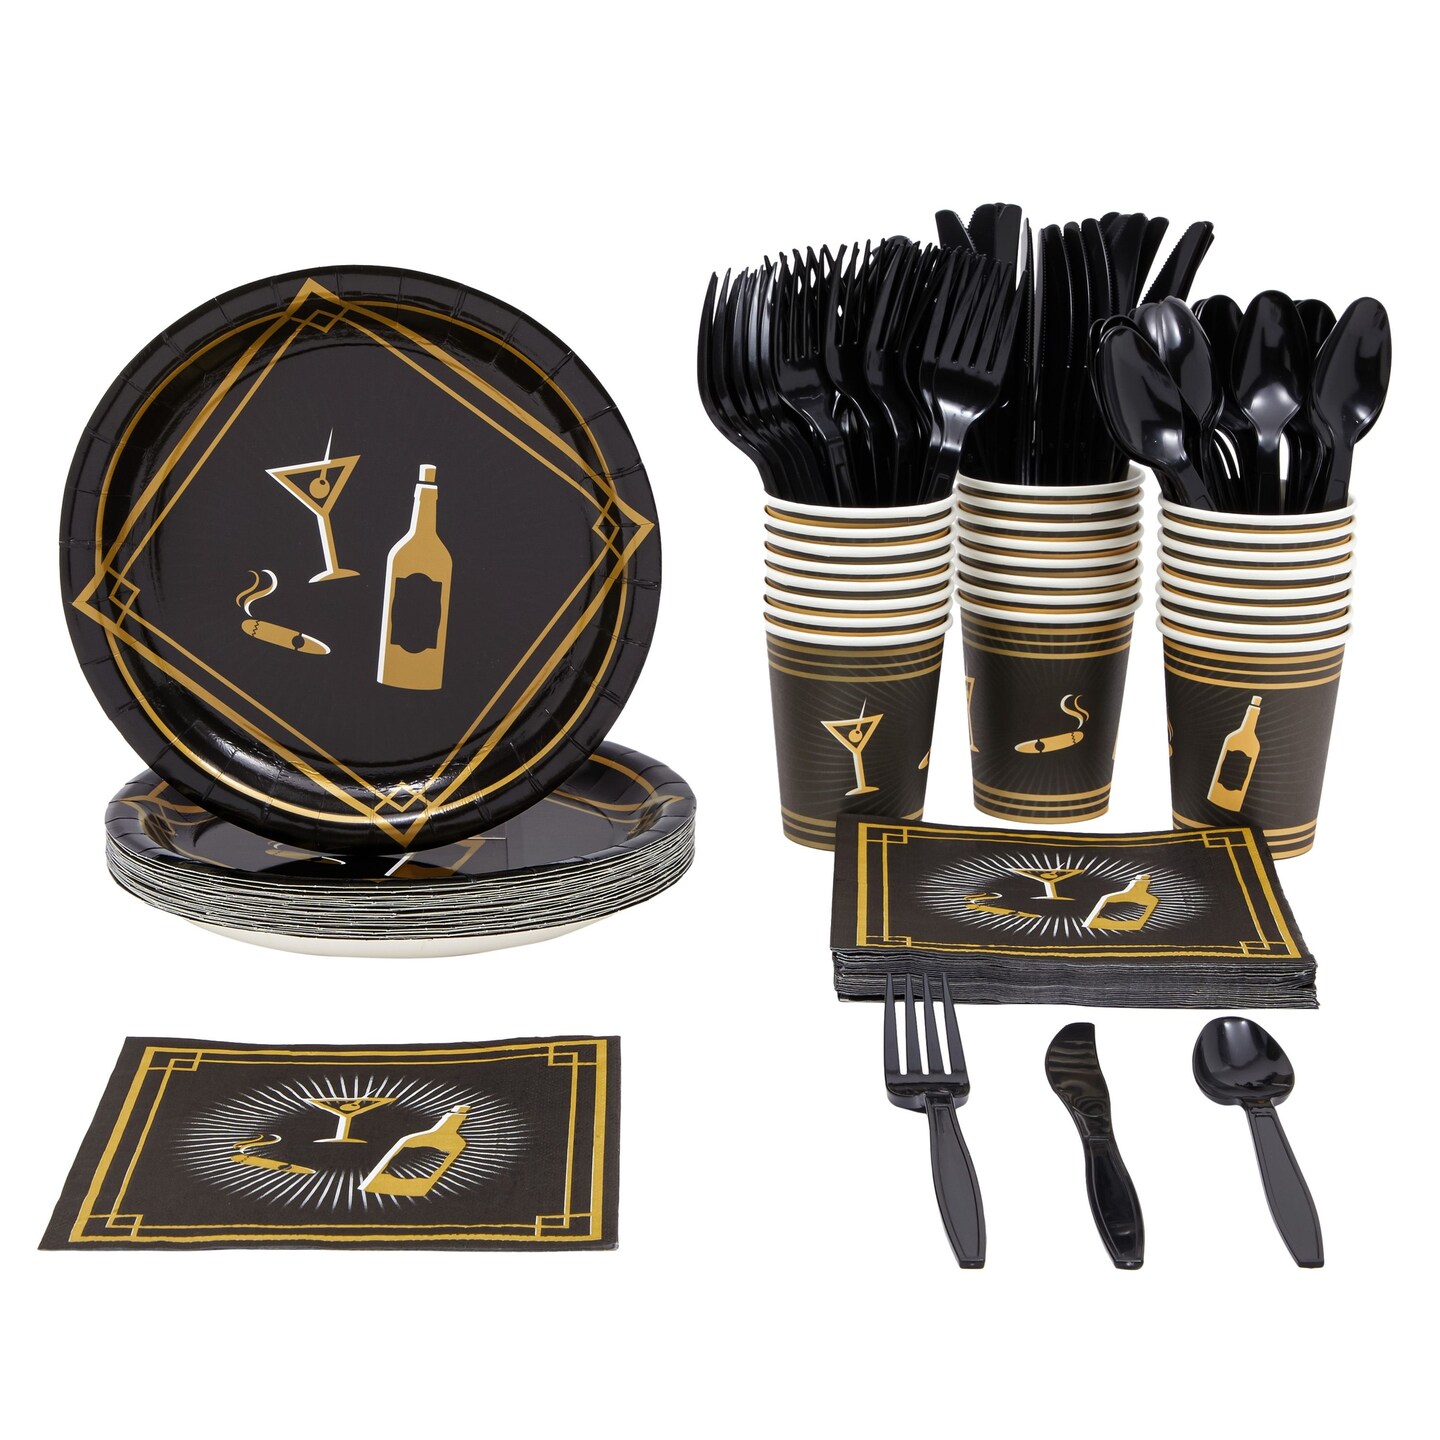 144 Piece 1920s Party Decorations - Murder Mystery Party Theme